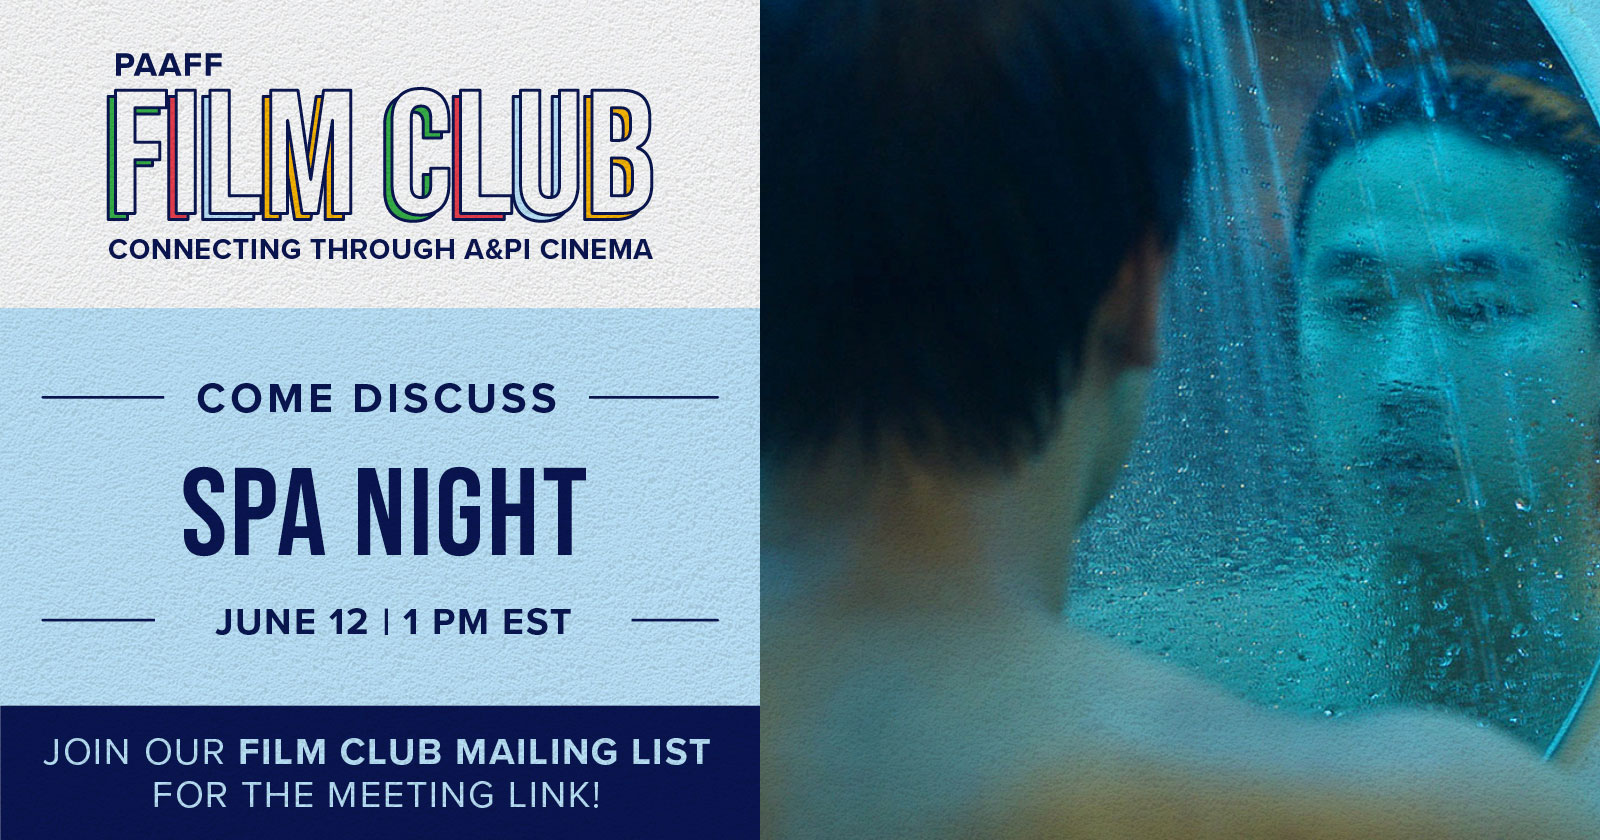 PAAFF June 2022 Film Club Graphic - Reads "Come discuss Spa Night - June 12 | 1 PM EST. Join our Film Club Mailing List for the meeting link!" Man looking at himself in a wet mirror